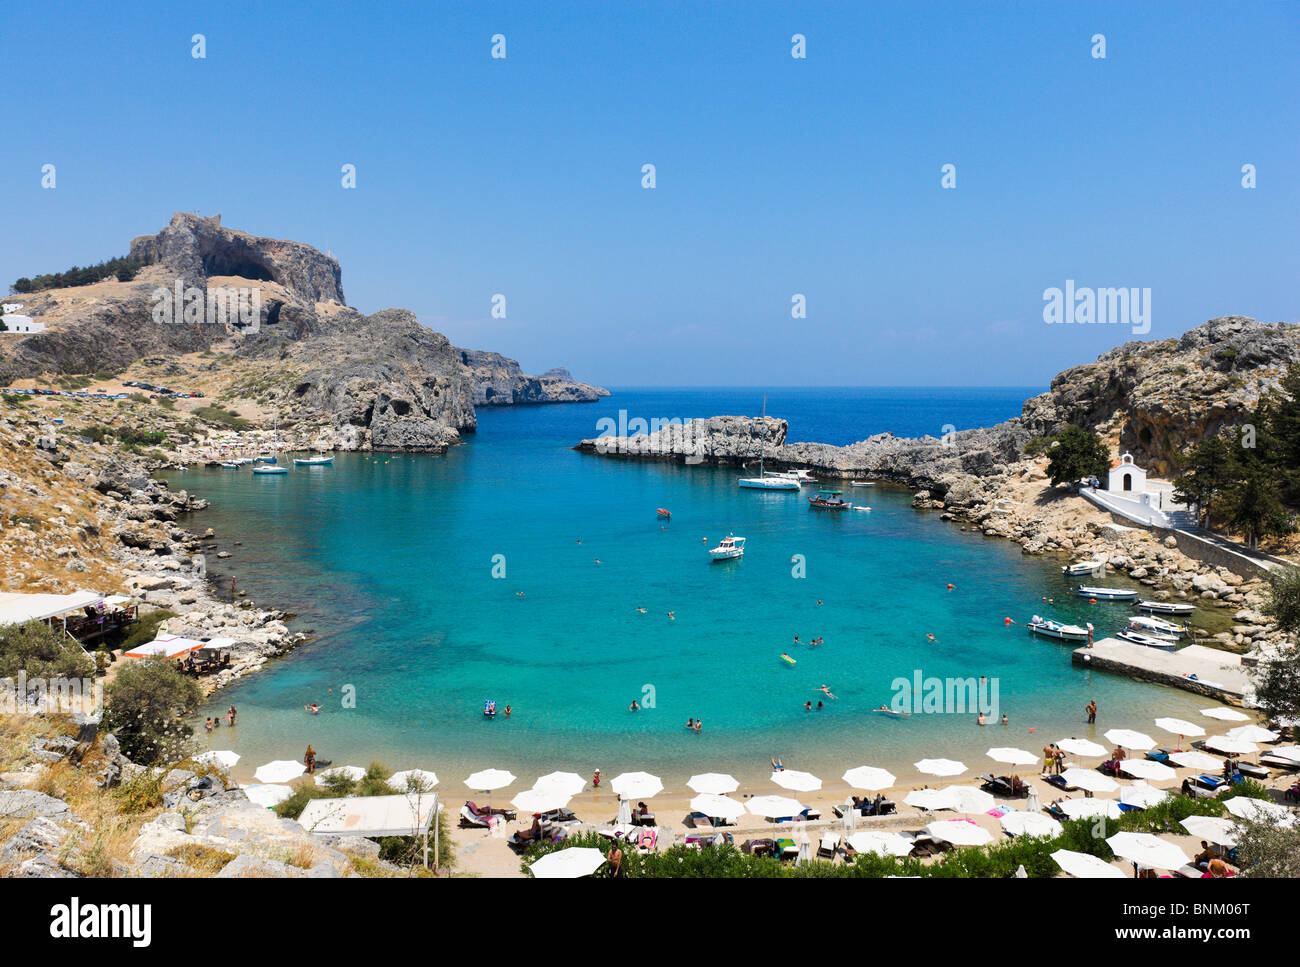 St Paul's Bay Beach with the Acropolis behind, Lindos, Rhodes, Greece Stock Photo